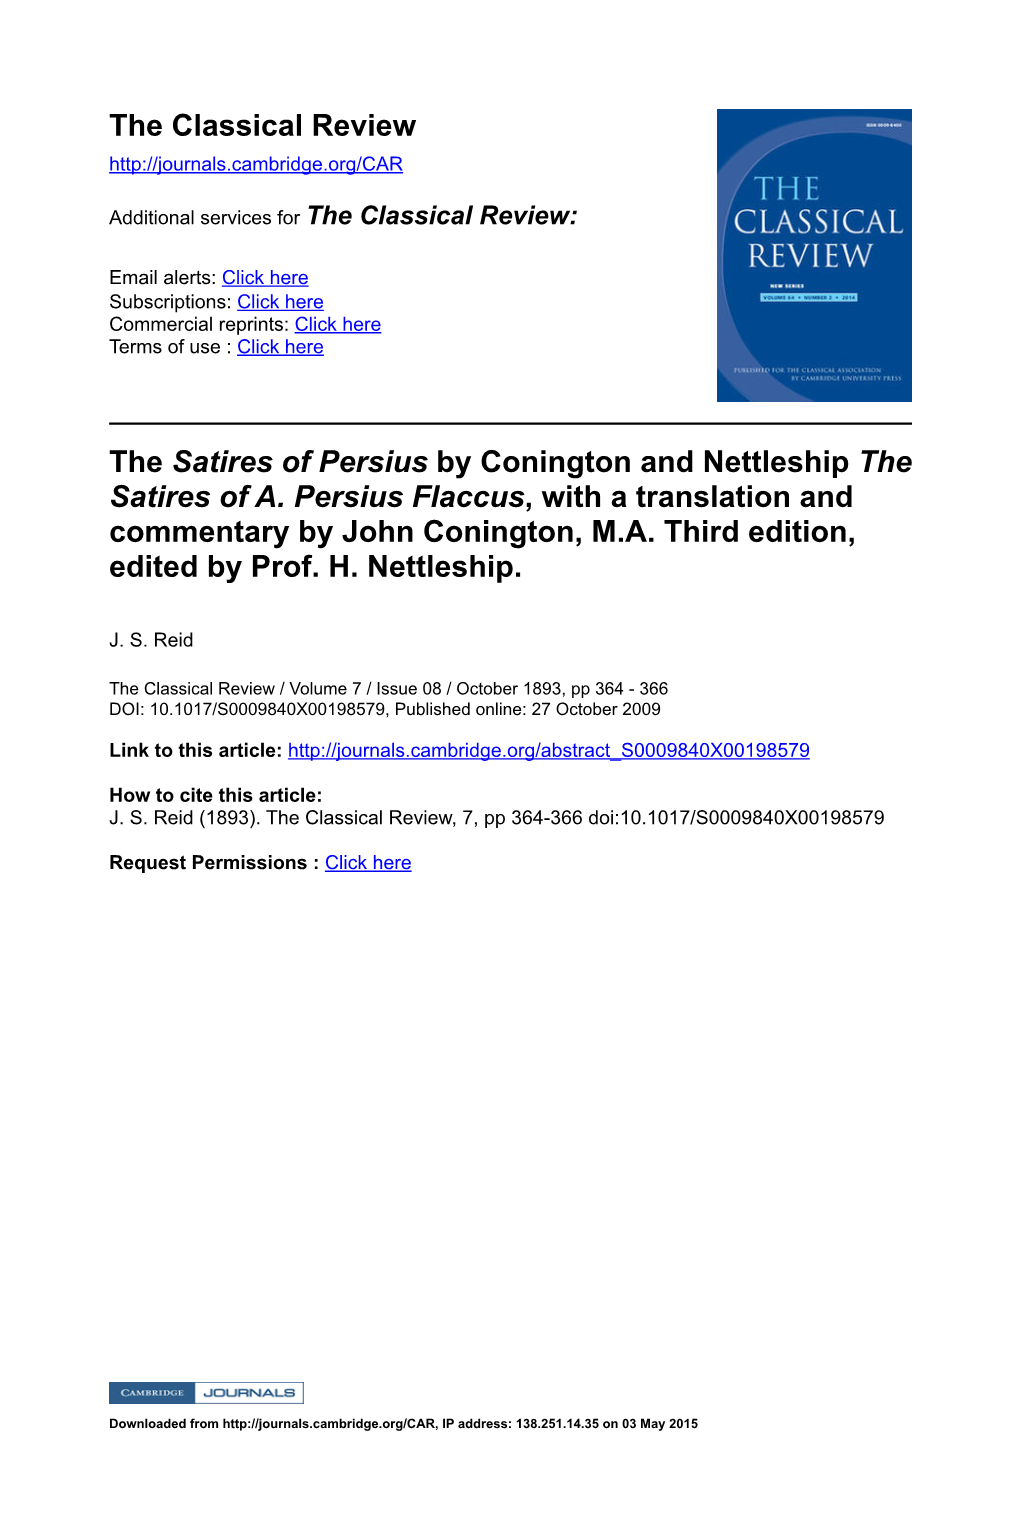 The Satires of Persius by Conington and Nettleship the Satires of A